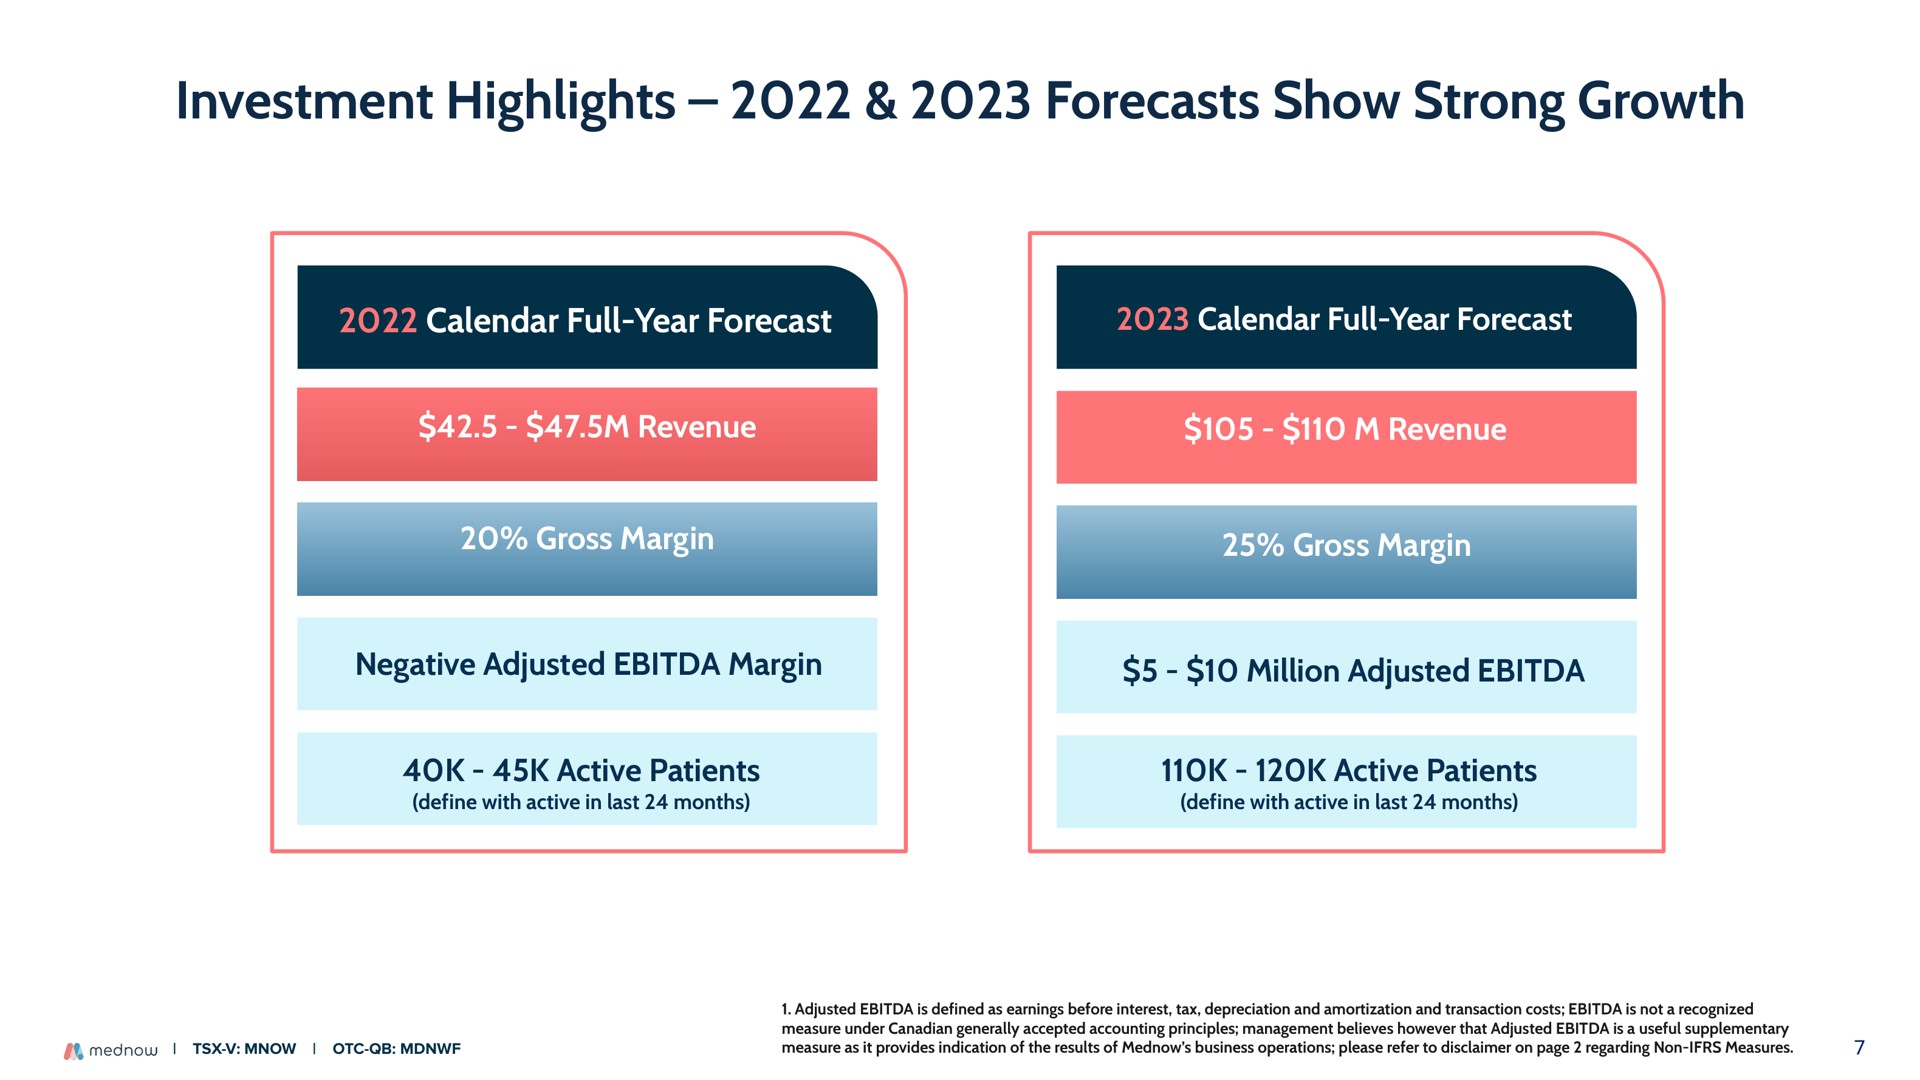 investment highlights forecasts show strong growth | Mednow